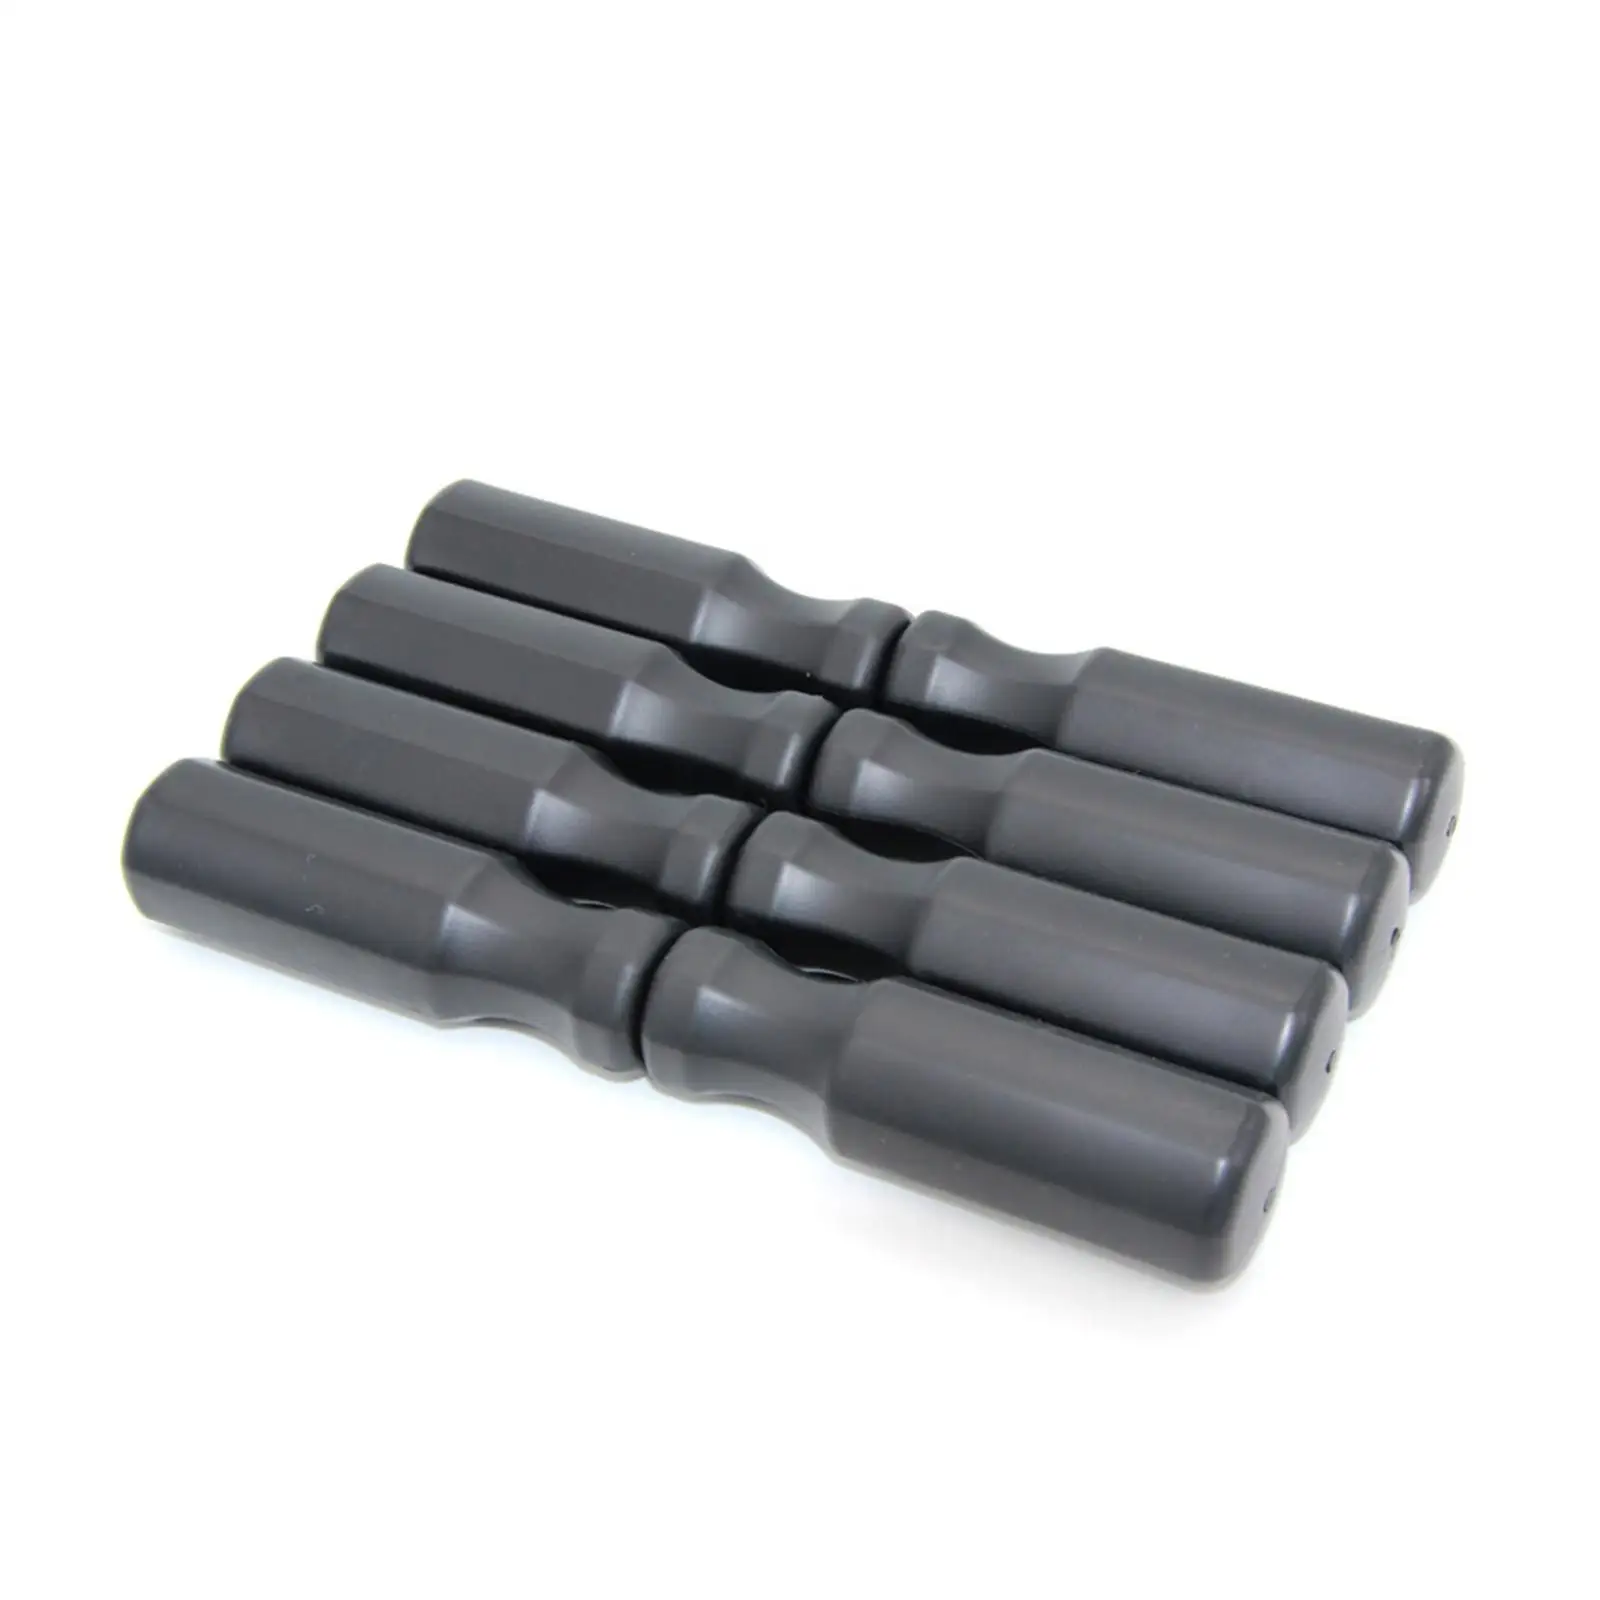 8Pcs Octagonal Replacement Handles Easy Using for Standard Foosball Tables